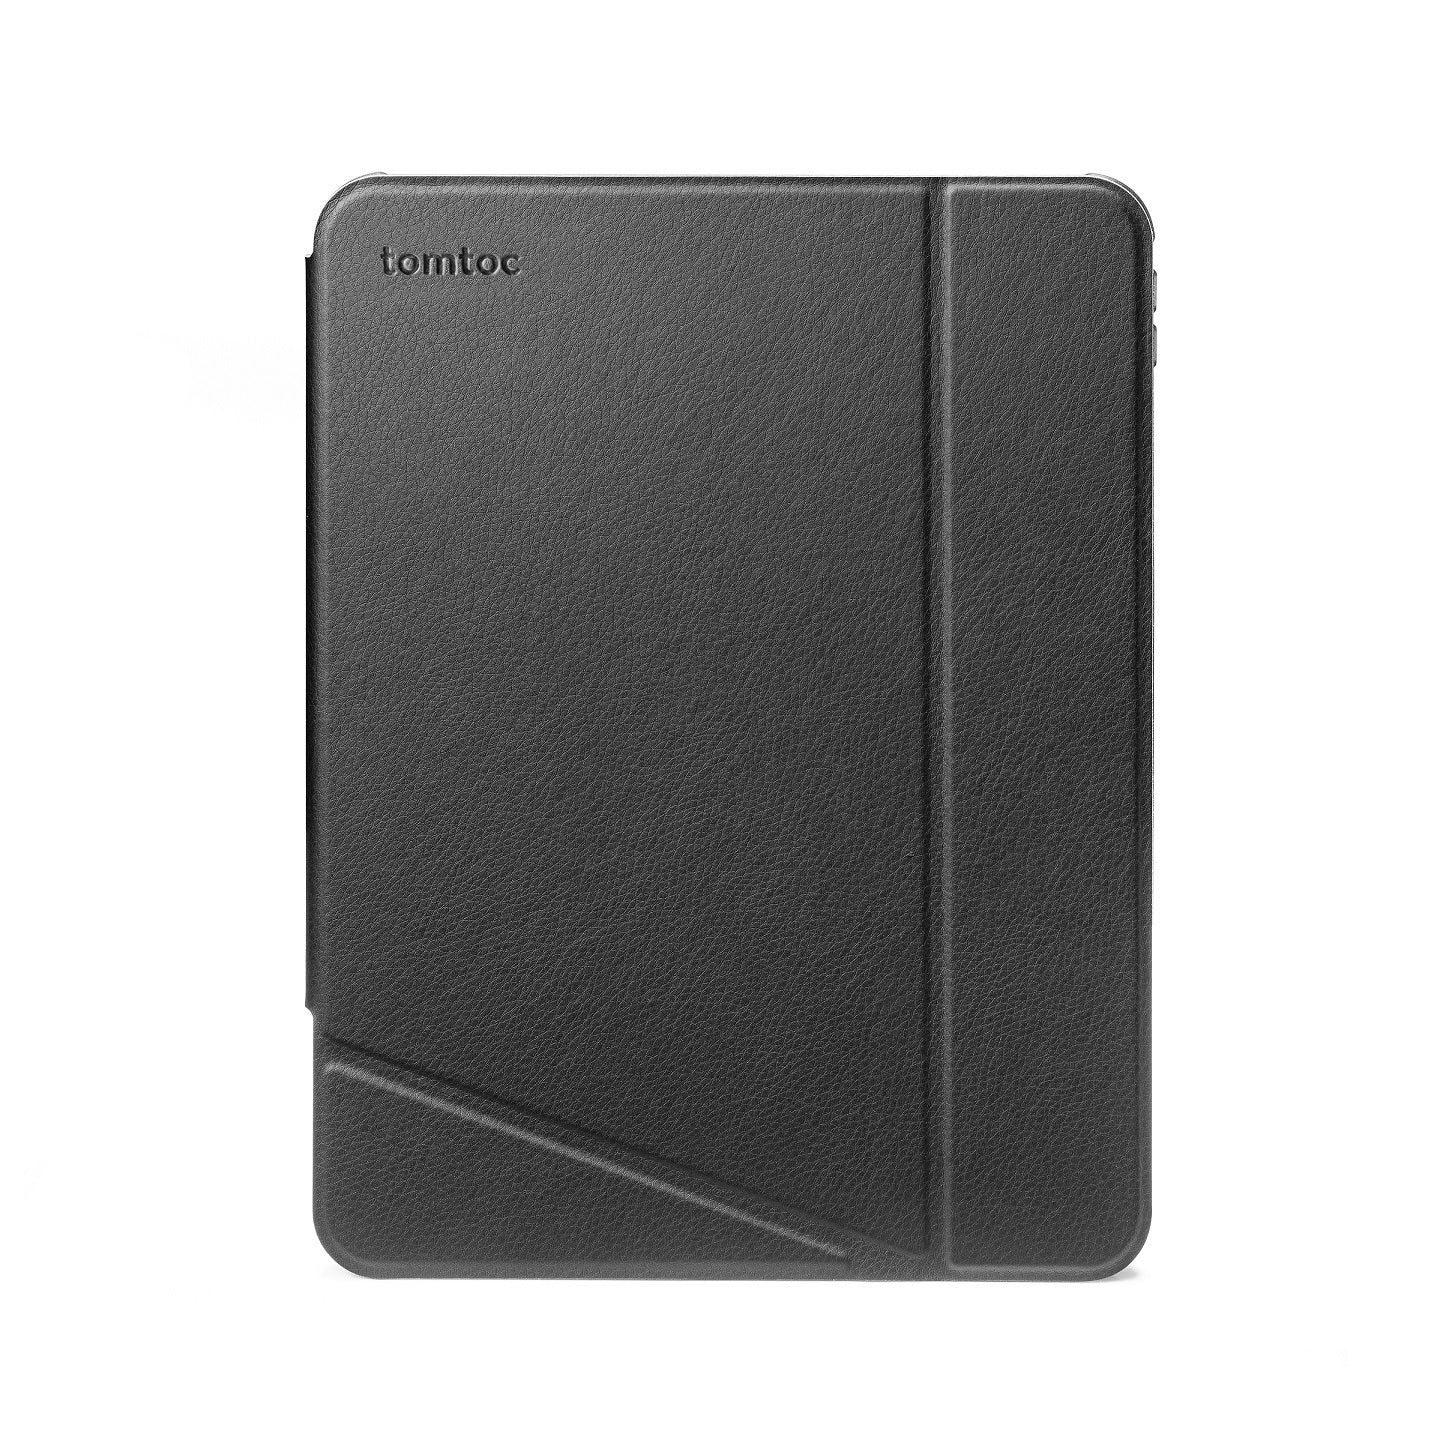 tomtoc 10.9 Inch Vertical iPad Tri-Mode Case with iPad Pencil Holder - Black